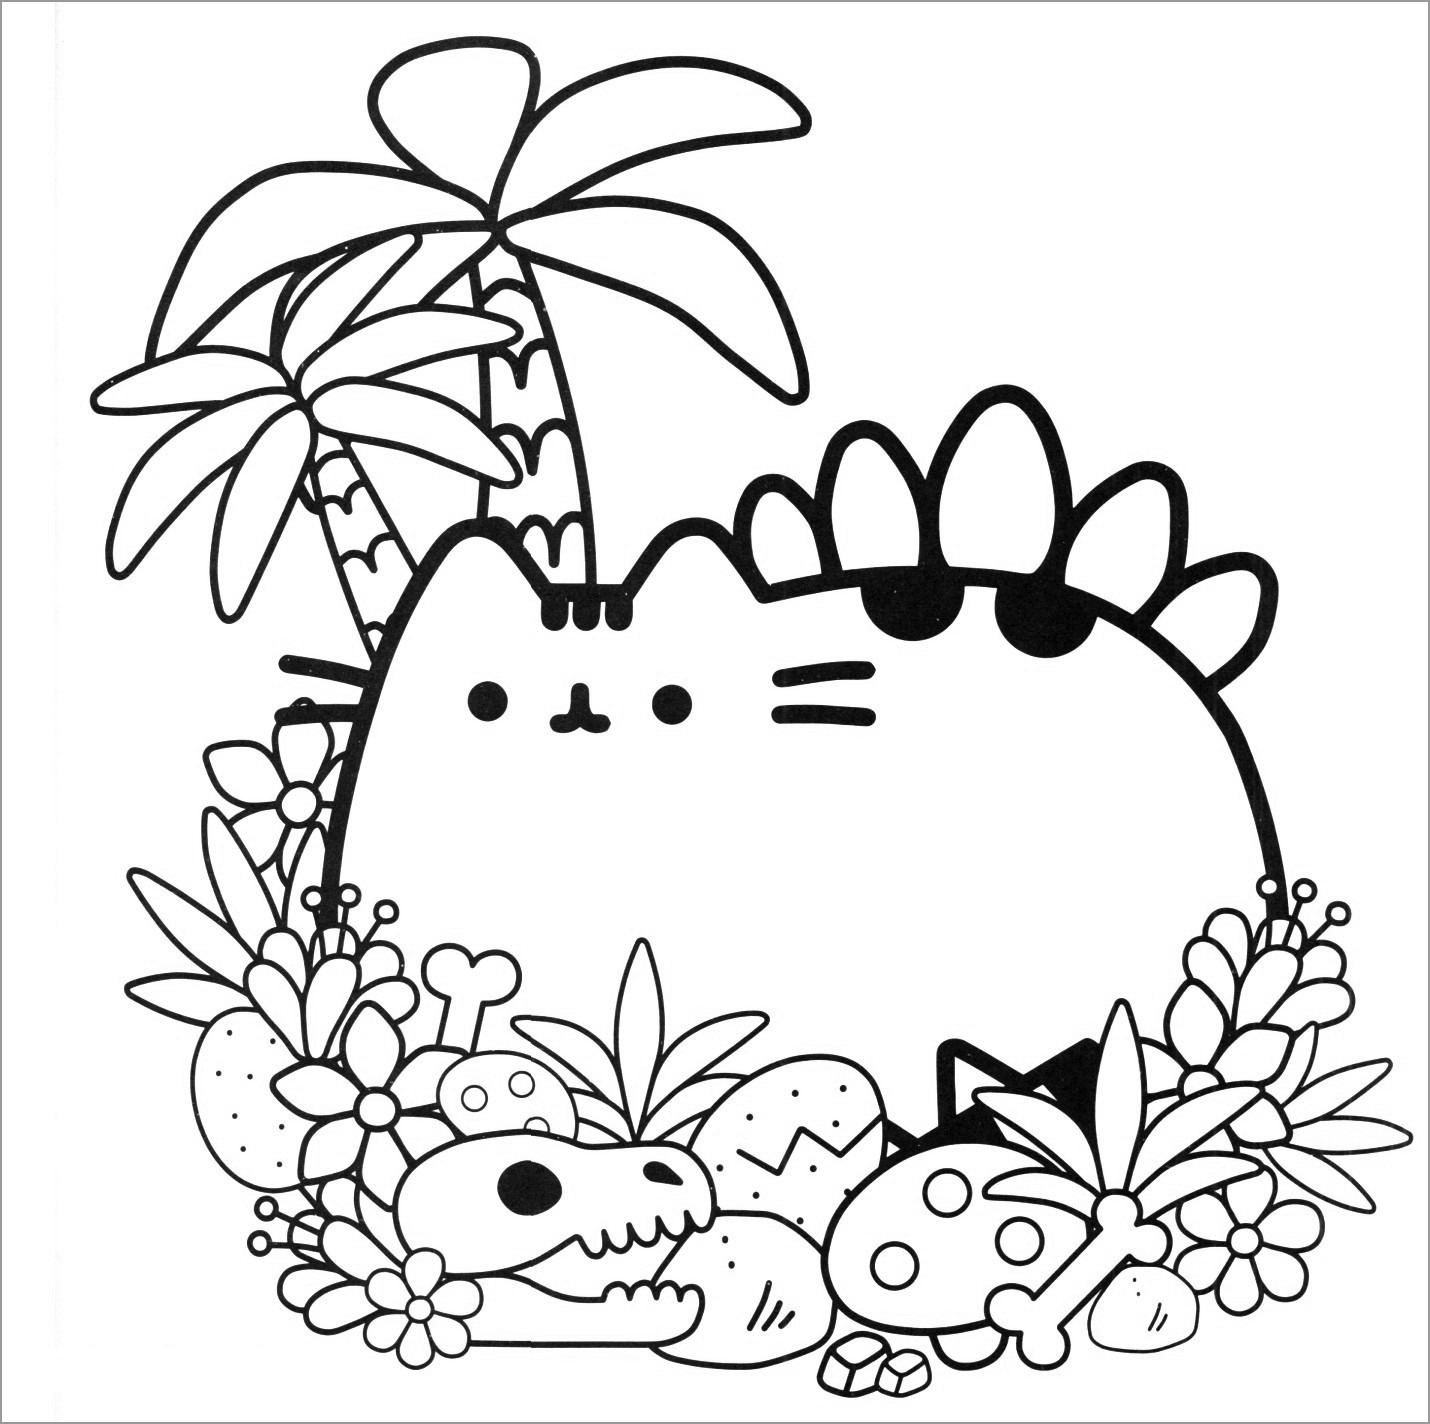 Pusheen island Coloring Page